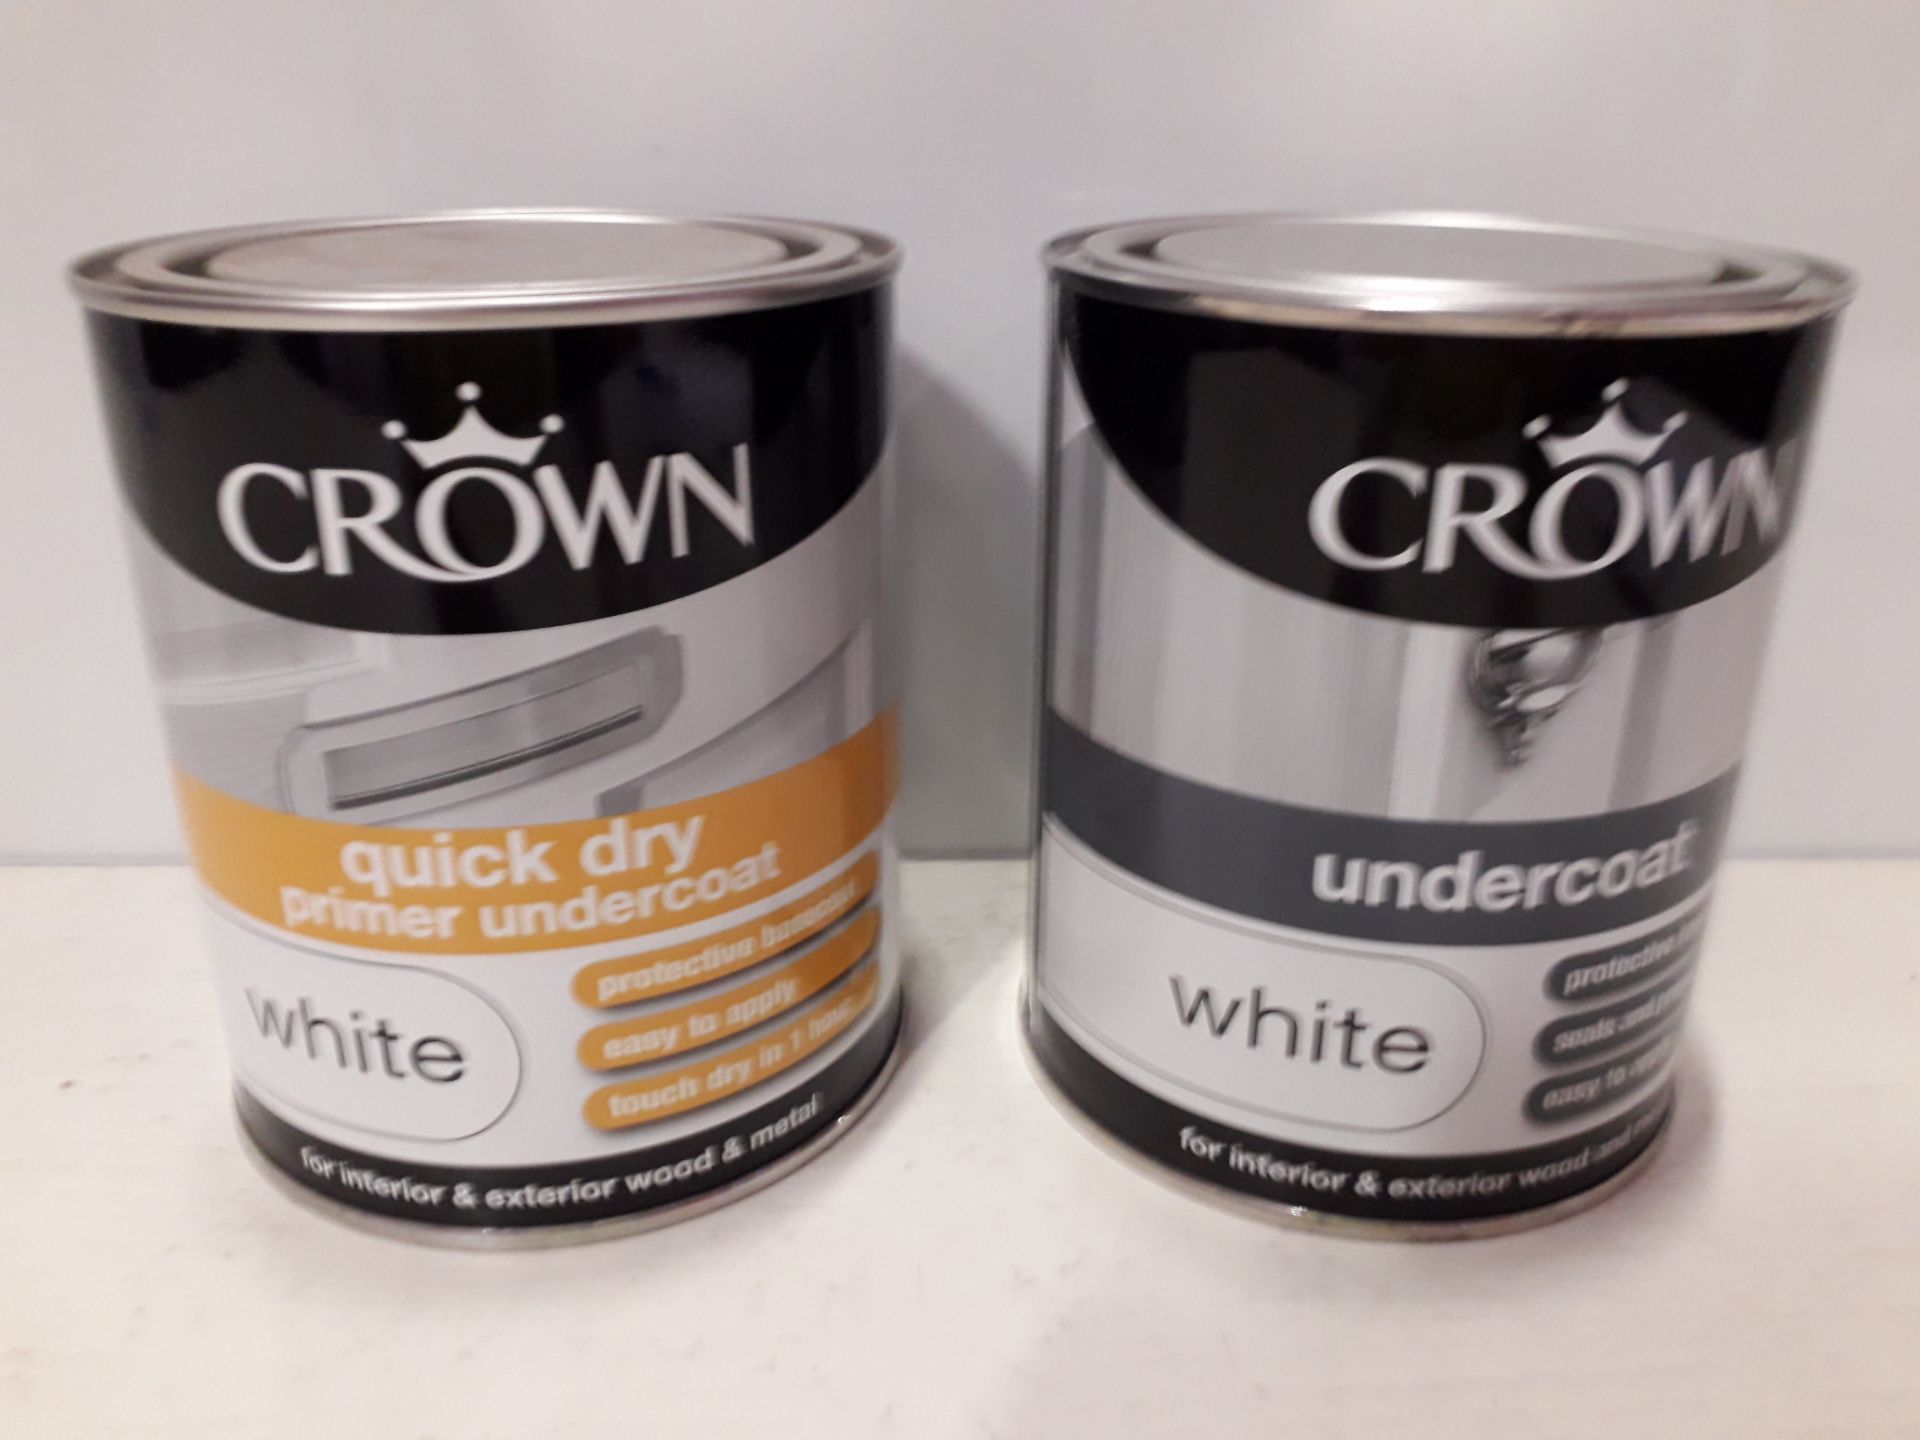 30 X BRAND NEW CROWN QUICK DRY PRIMER UNDERCOAT ( WHITE ) FOR INTERIOR AND EXTERIOR WOOD AND METAL